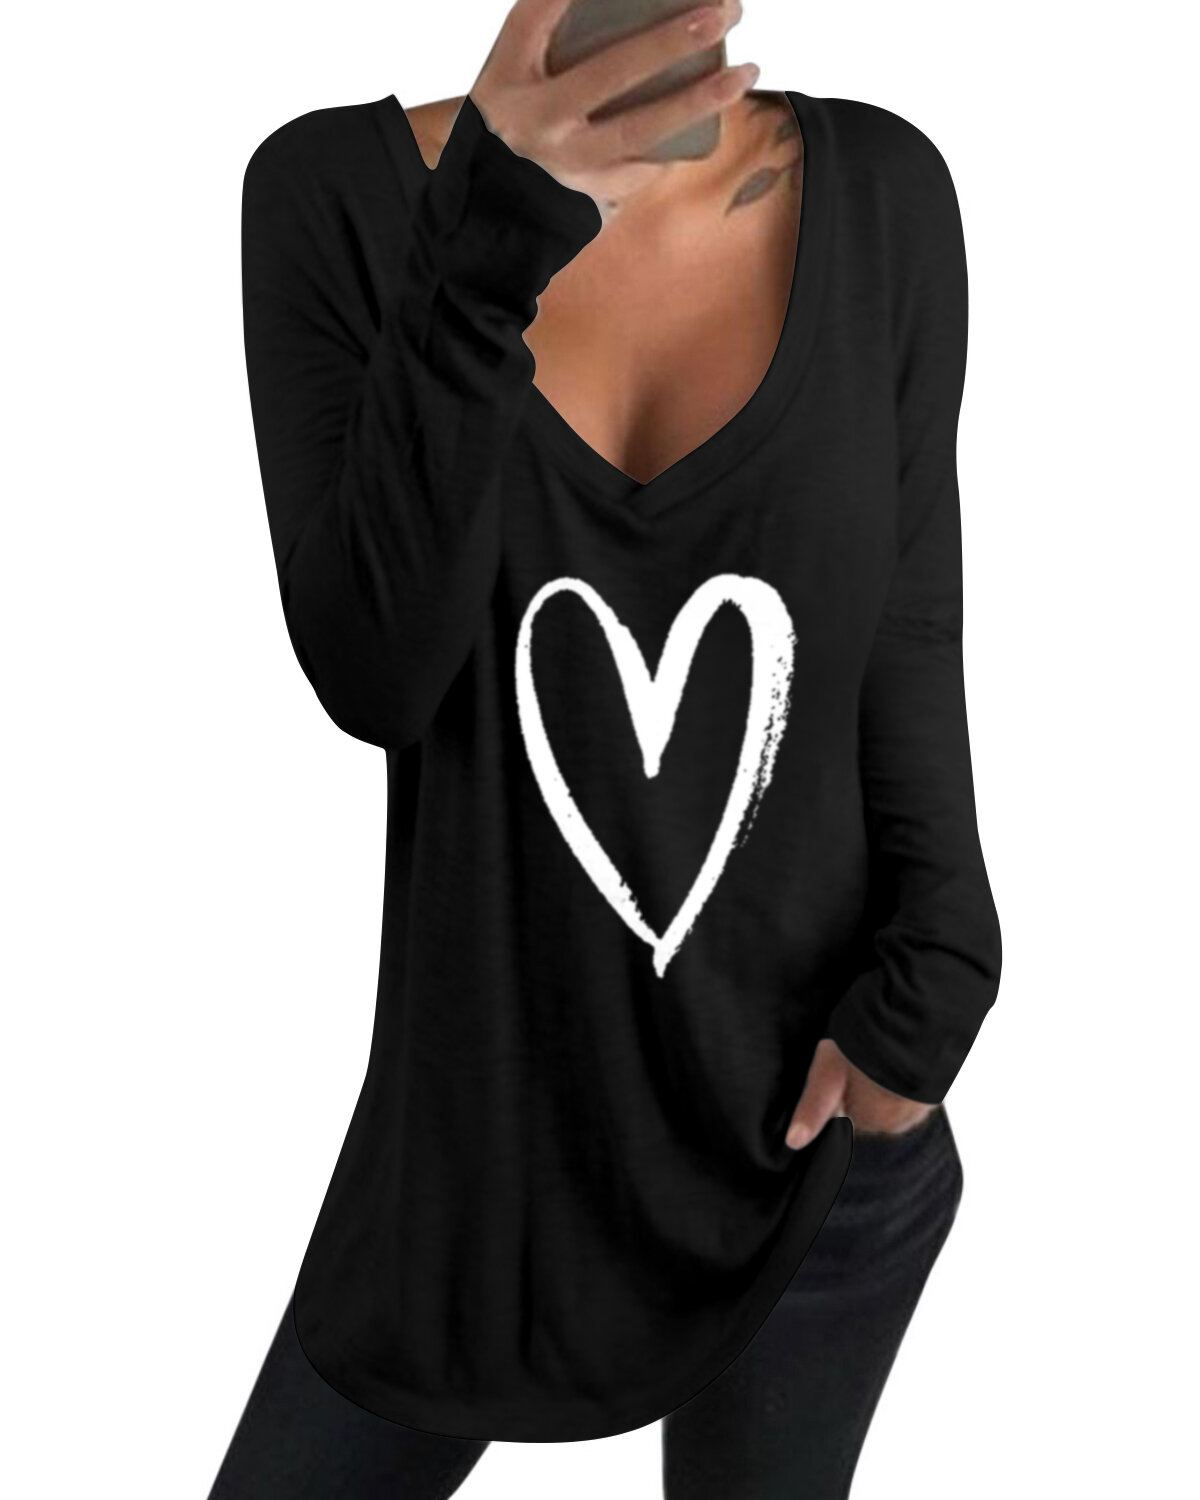 Casual loose love printed v neck long sleeves t-shirts for women Sale ...